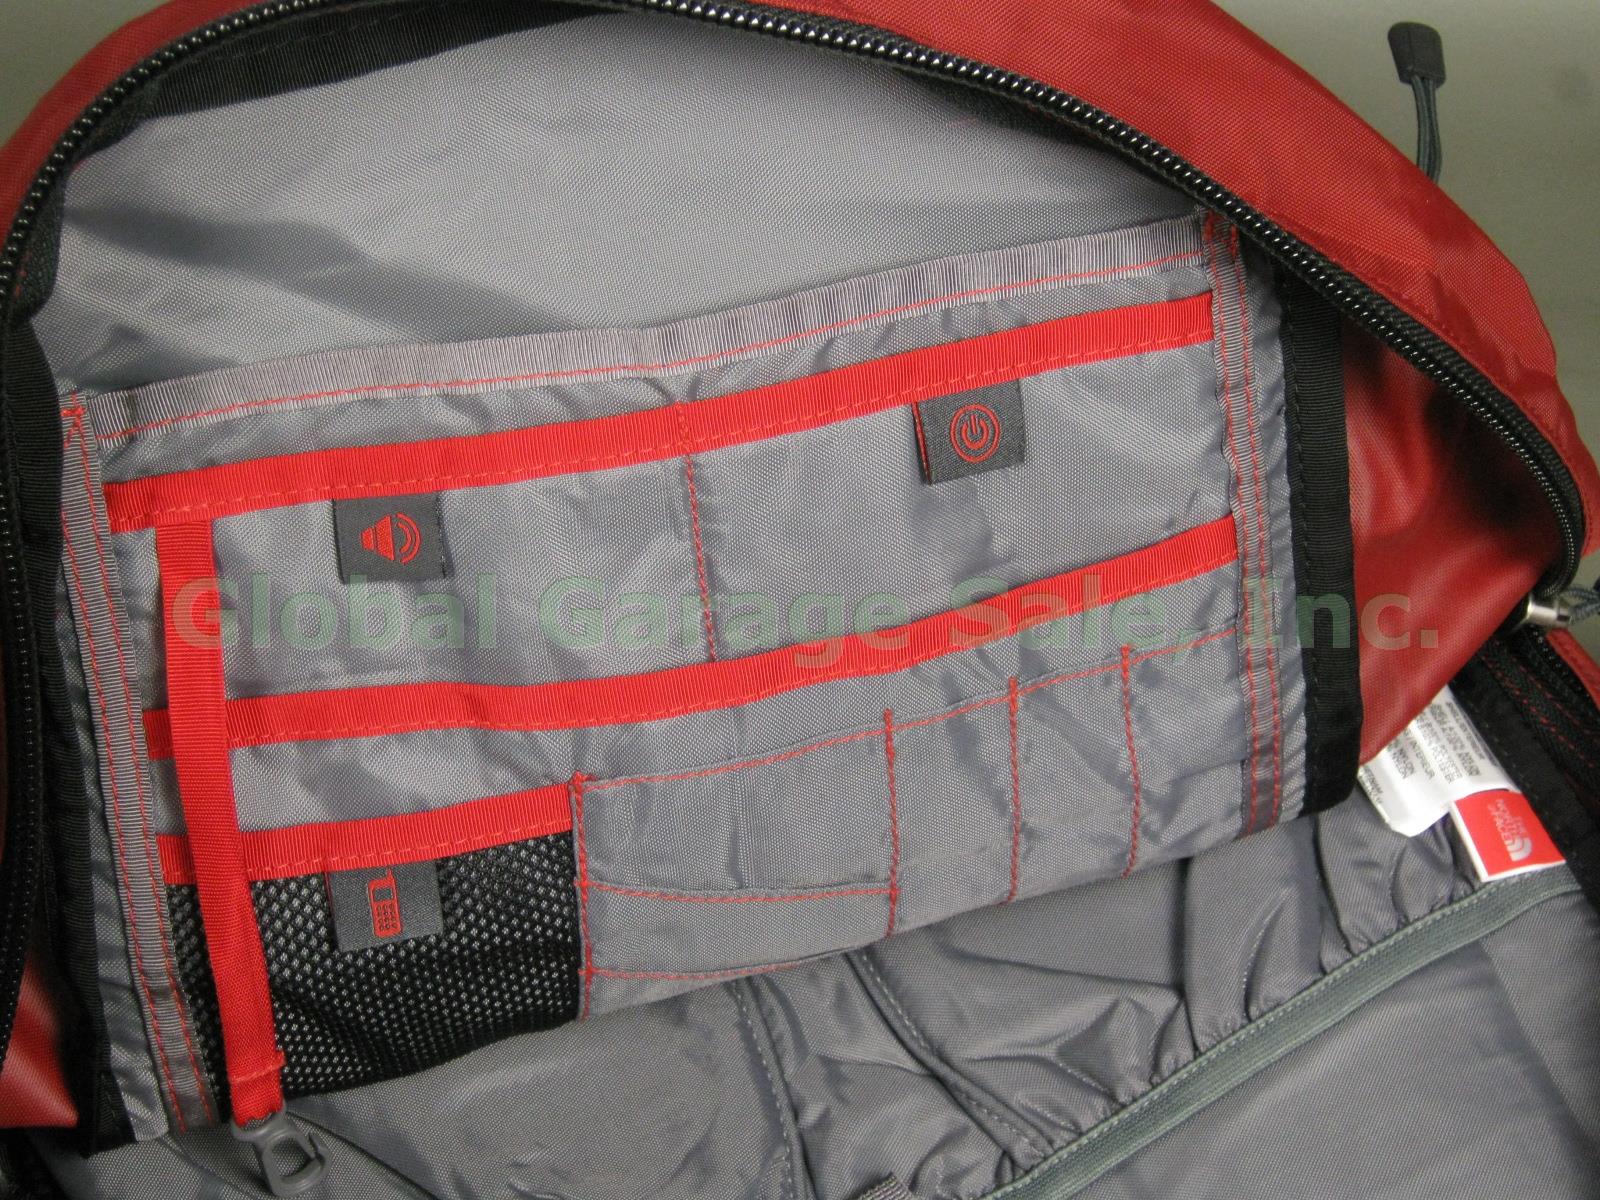 NEW NWT The North Face Big Shot Backpack Day Pack Laptop Book Bag Cardinal Red 7